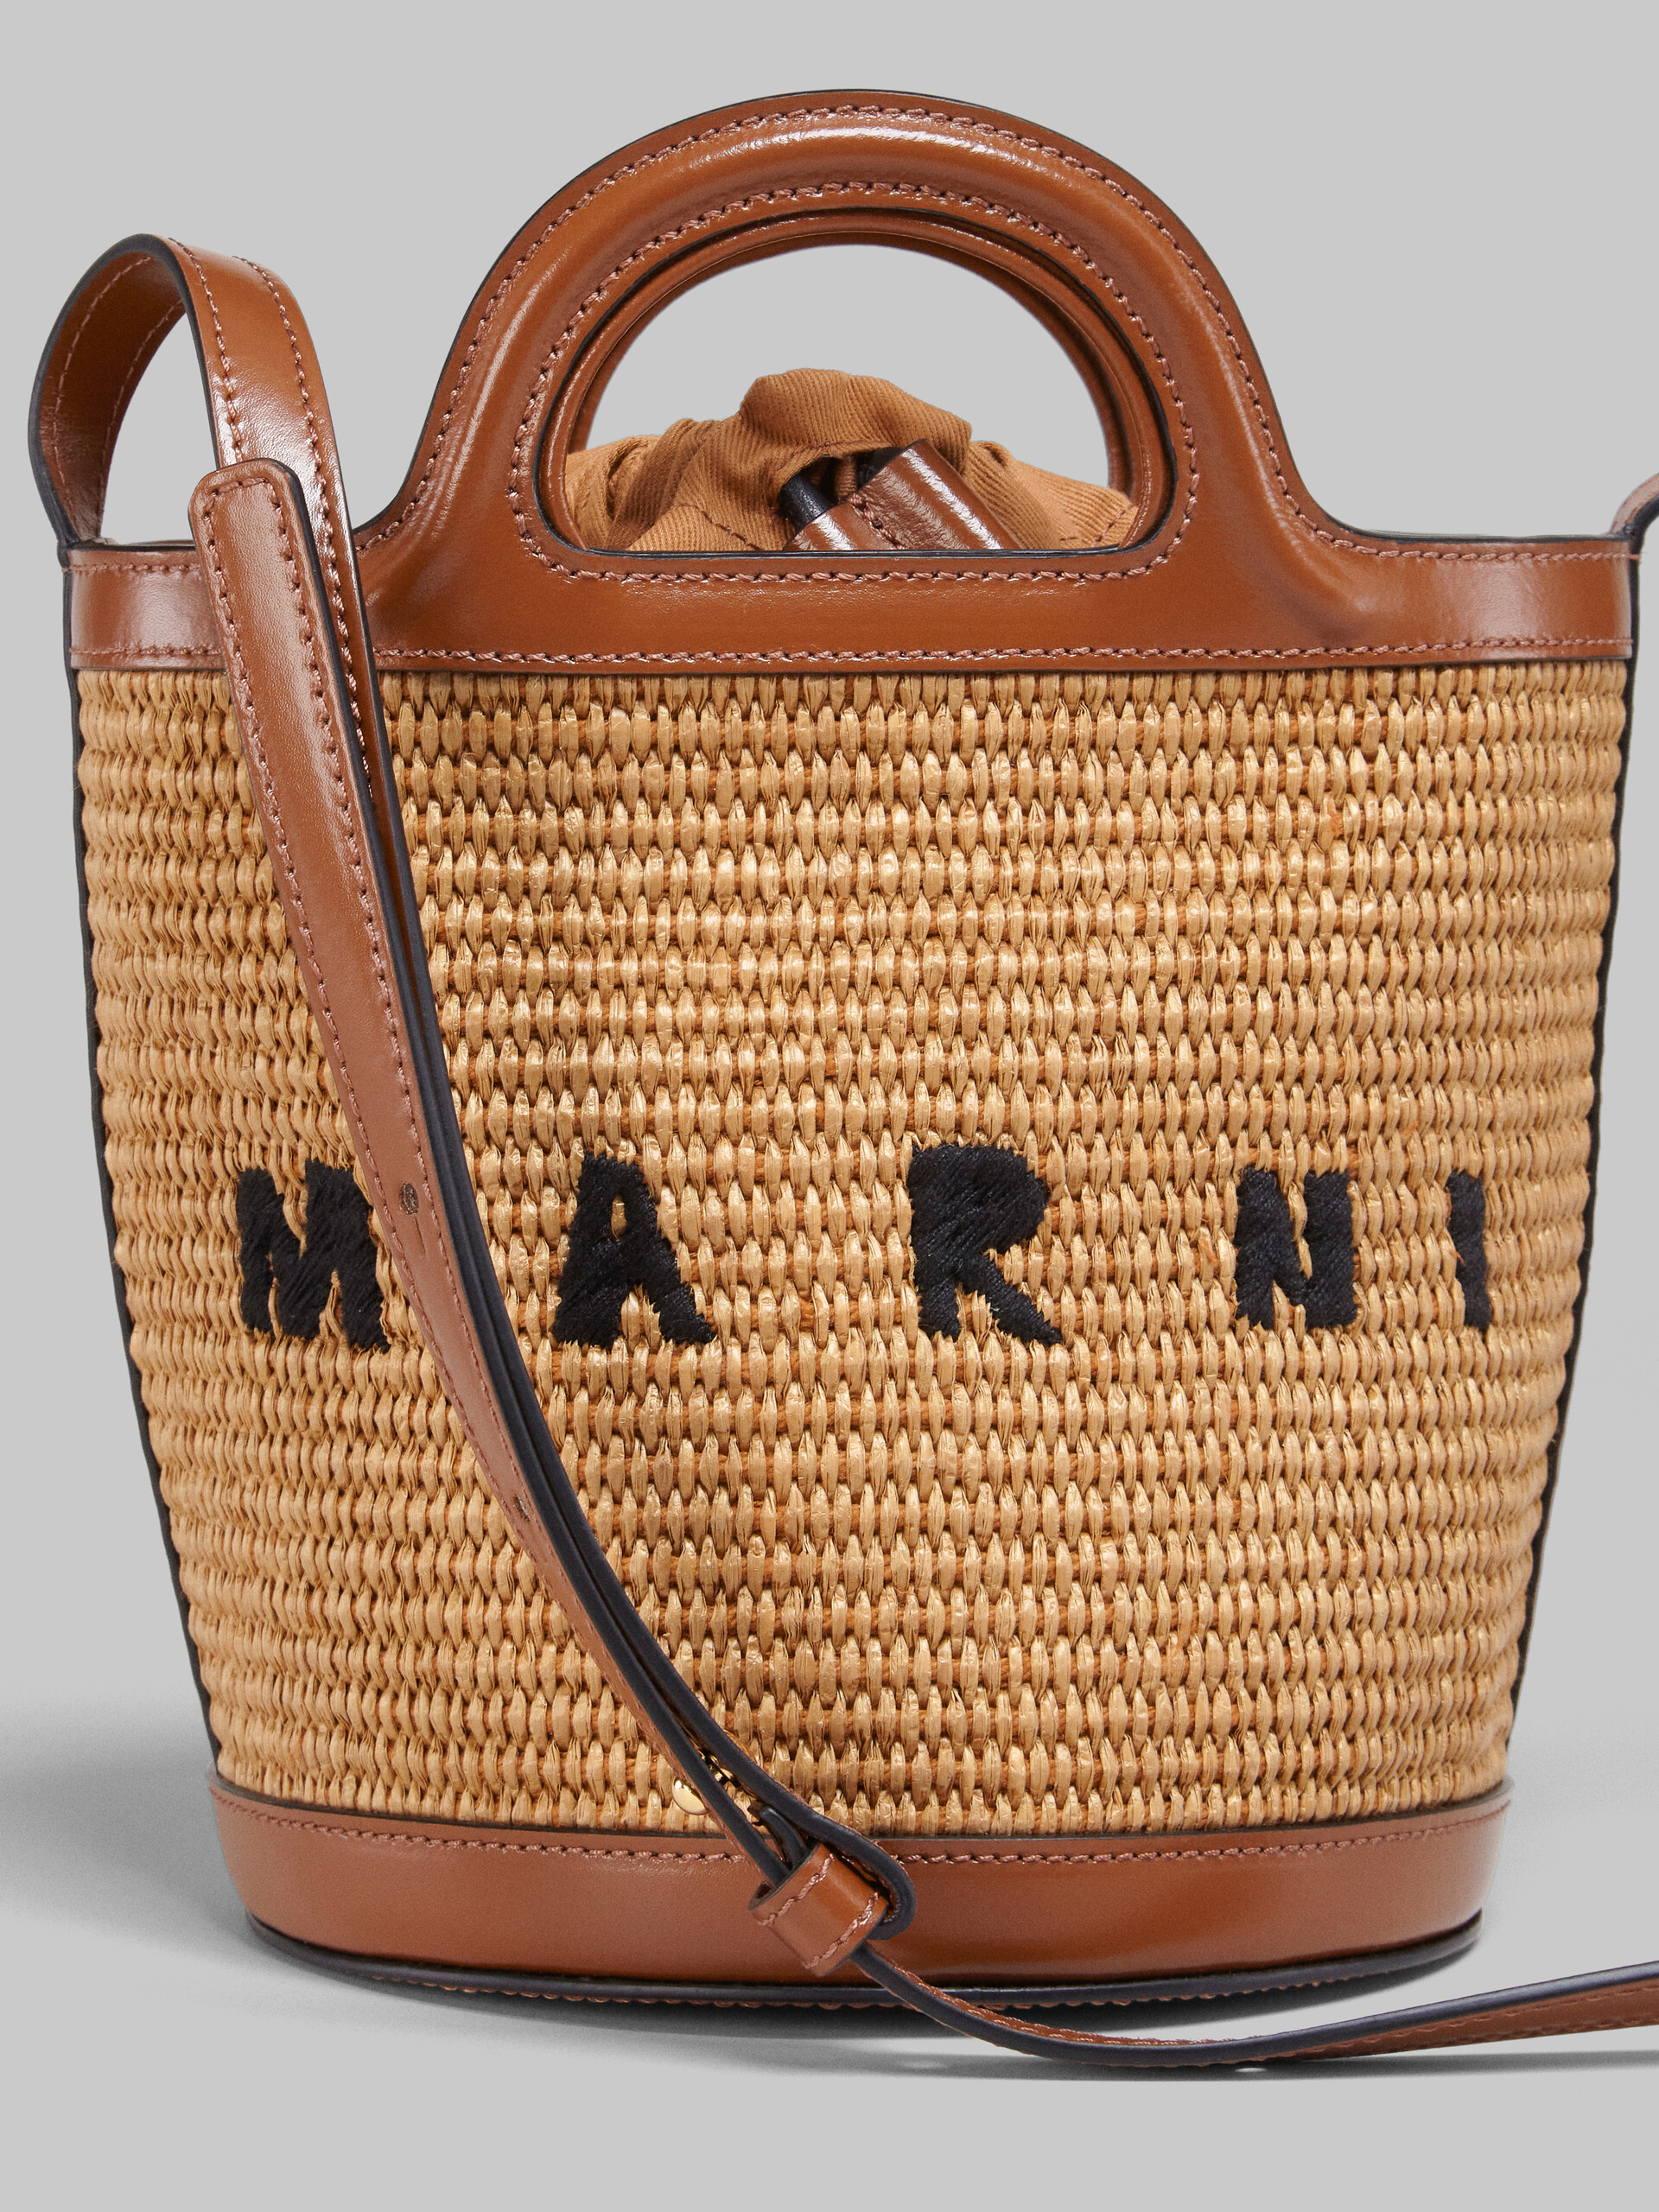 Tropicalia Small Bucket Bag in brown leather and raffia - Shoulder Bags - Image 4